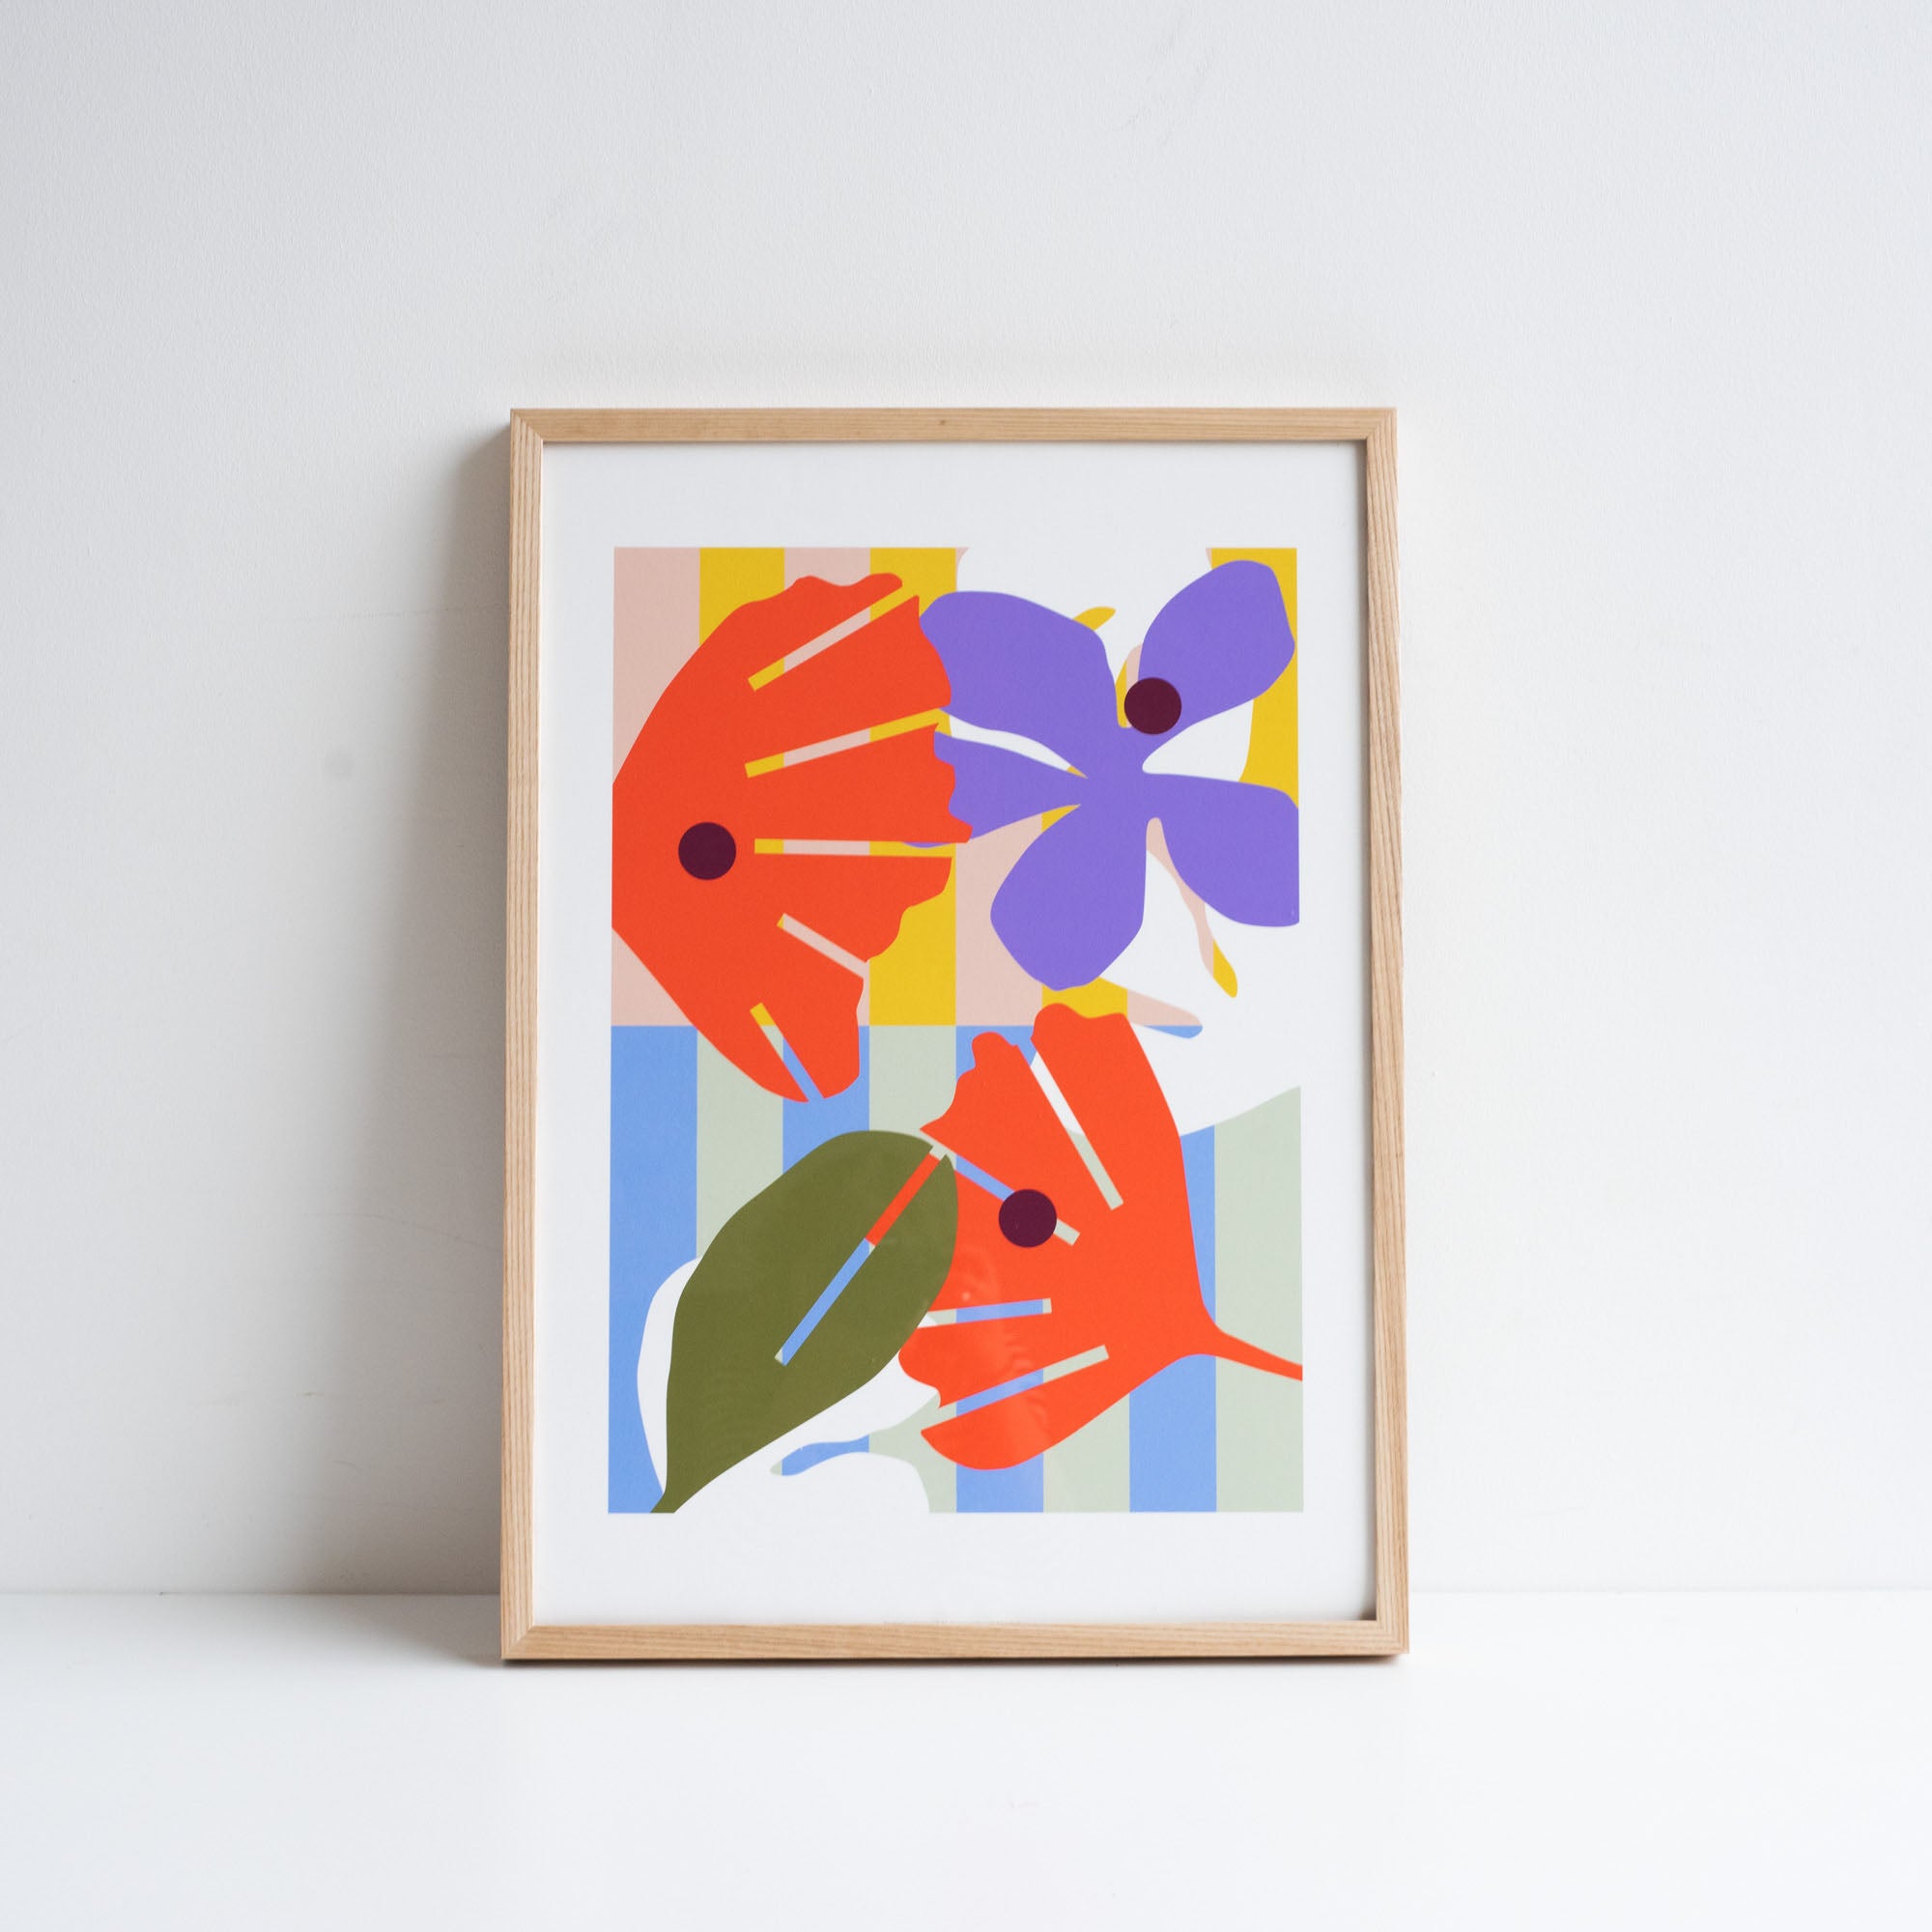 Print of digital illustration by Kate Moorhouse of colourful flowers - placed in an ash frame leant against a white wall